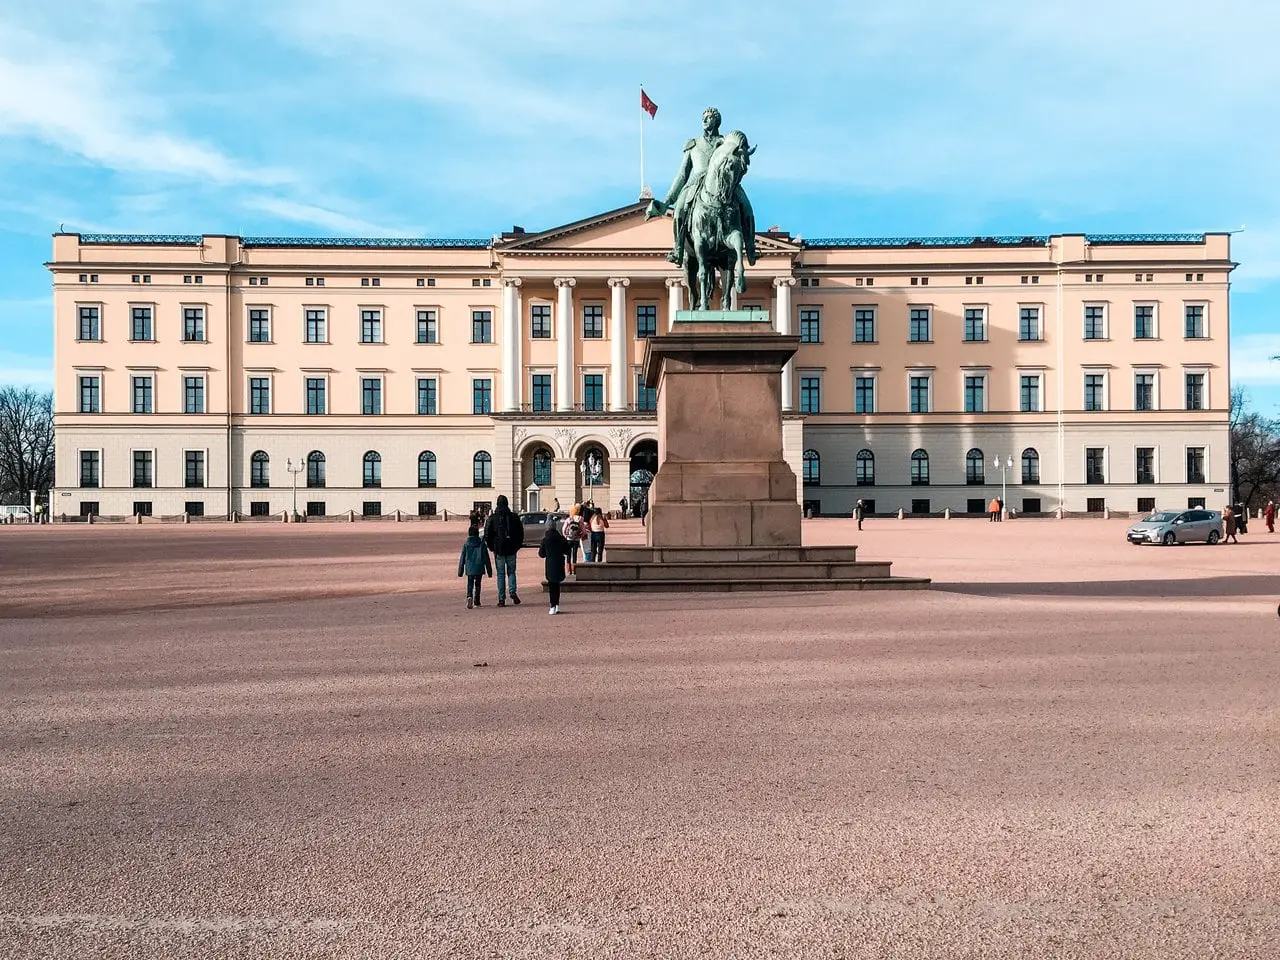 Front exterior of the Oslo Royal Palace, with the Norwegian flag flying above the building and a statue of a man on a horse in front of the palace.